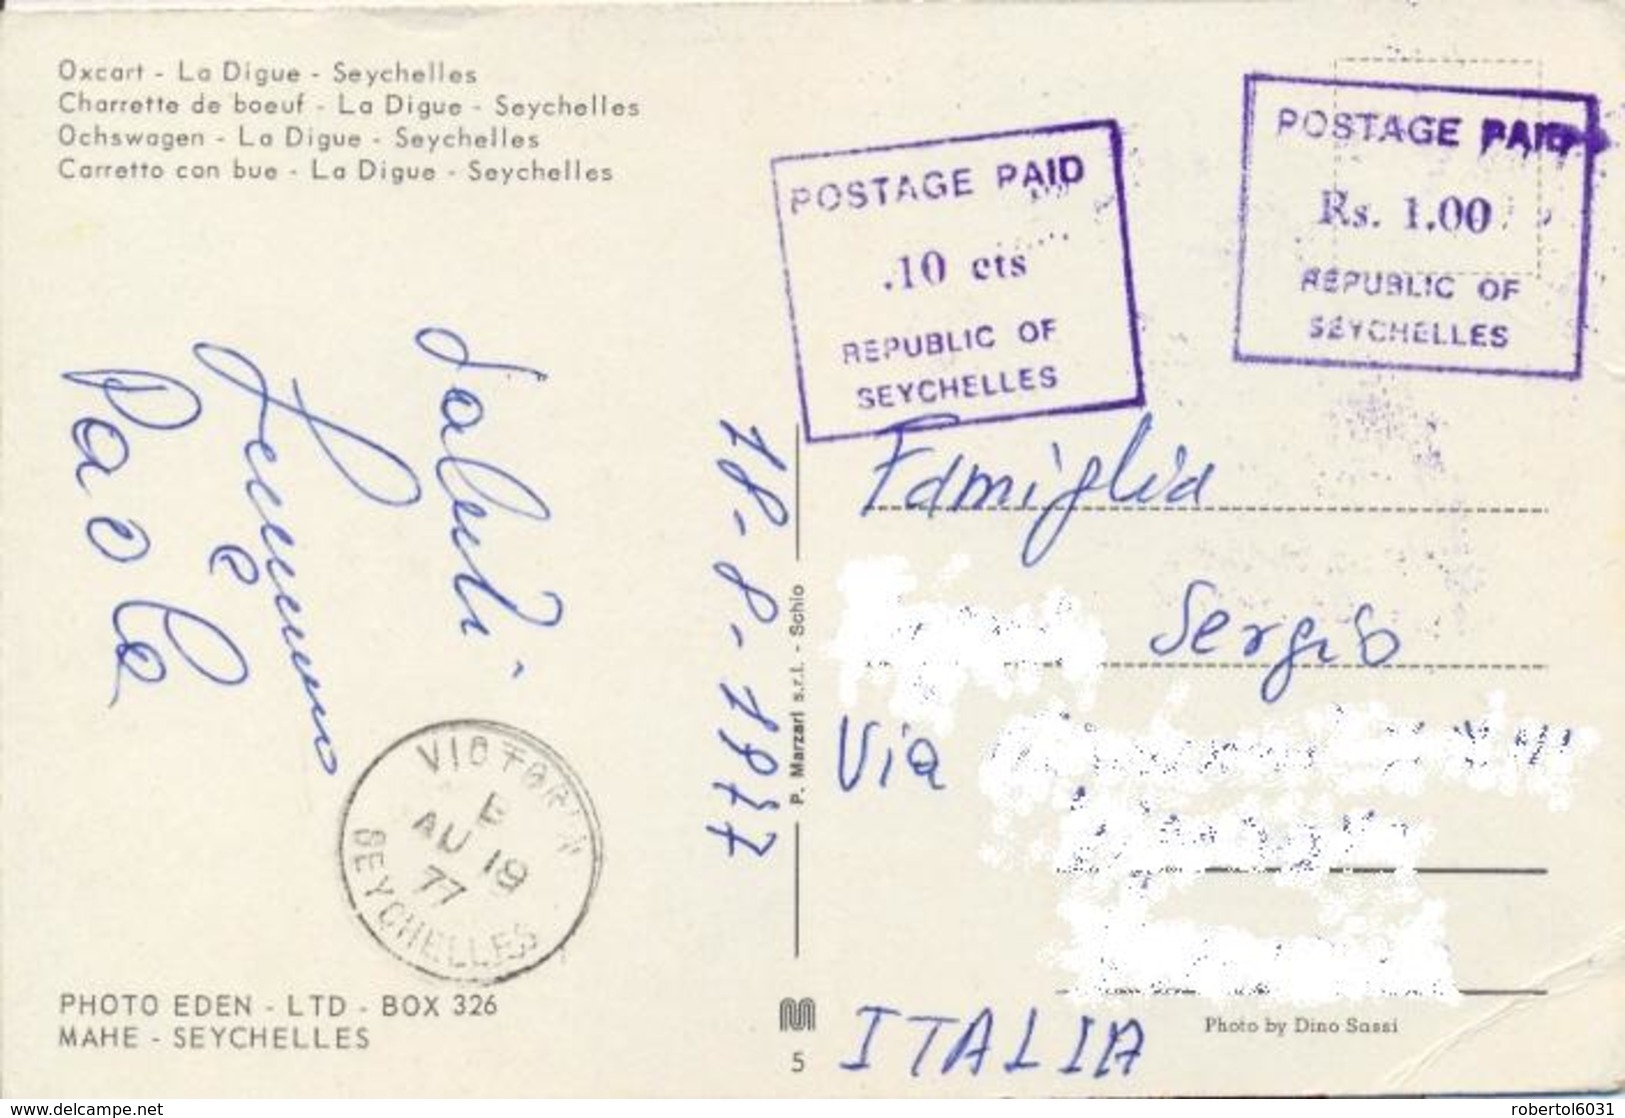 Seychelles 1977 Picture Postcard To Italy With Handstamps Postage Paid 10 C. + 1 Rs. - Seychelles (1976-...)